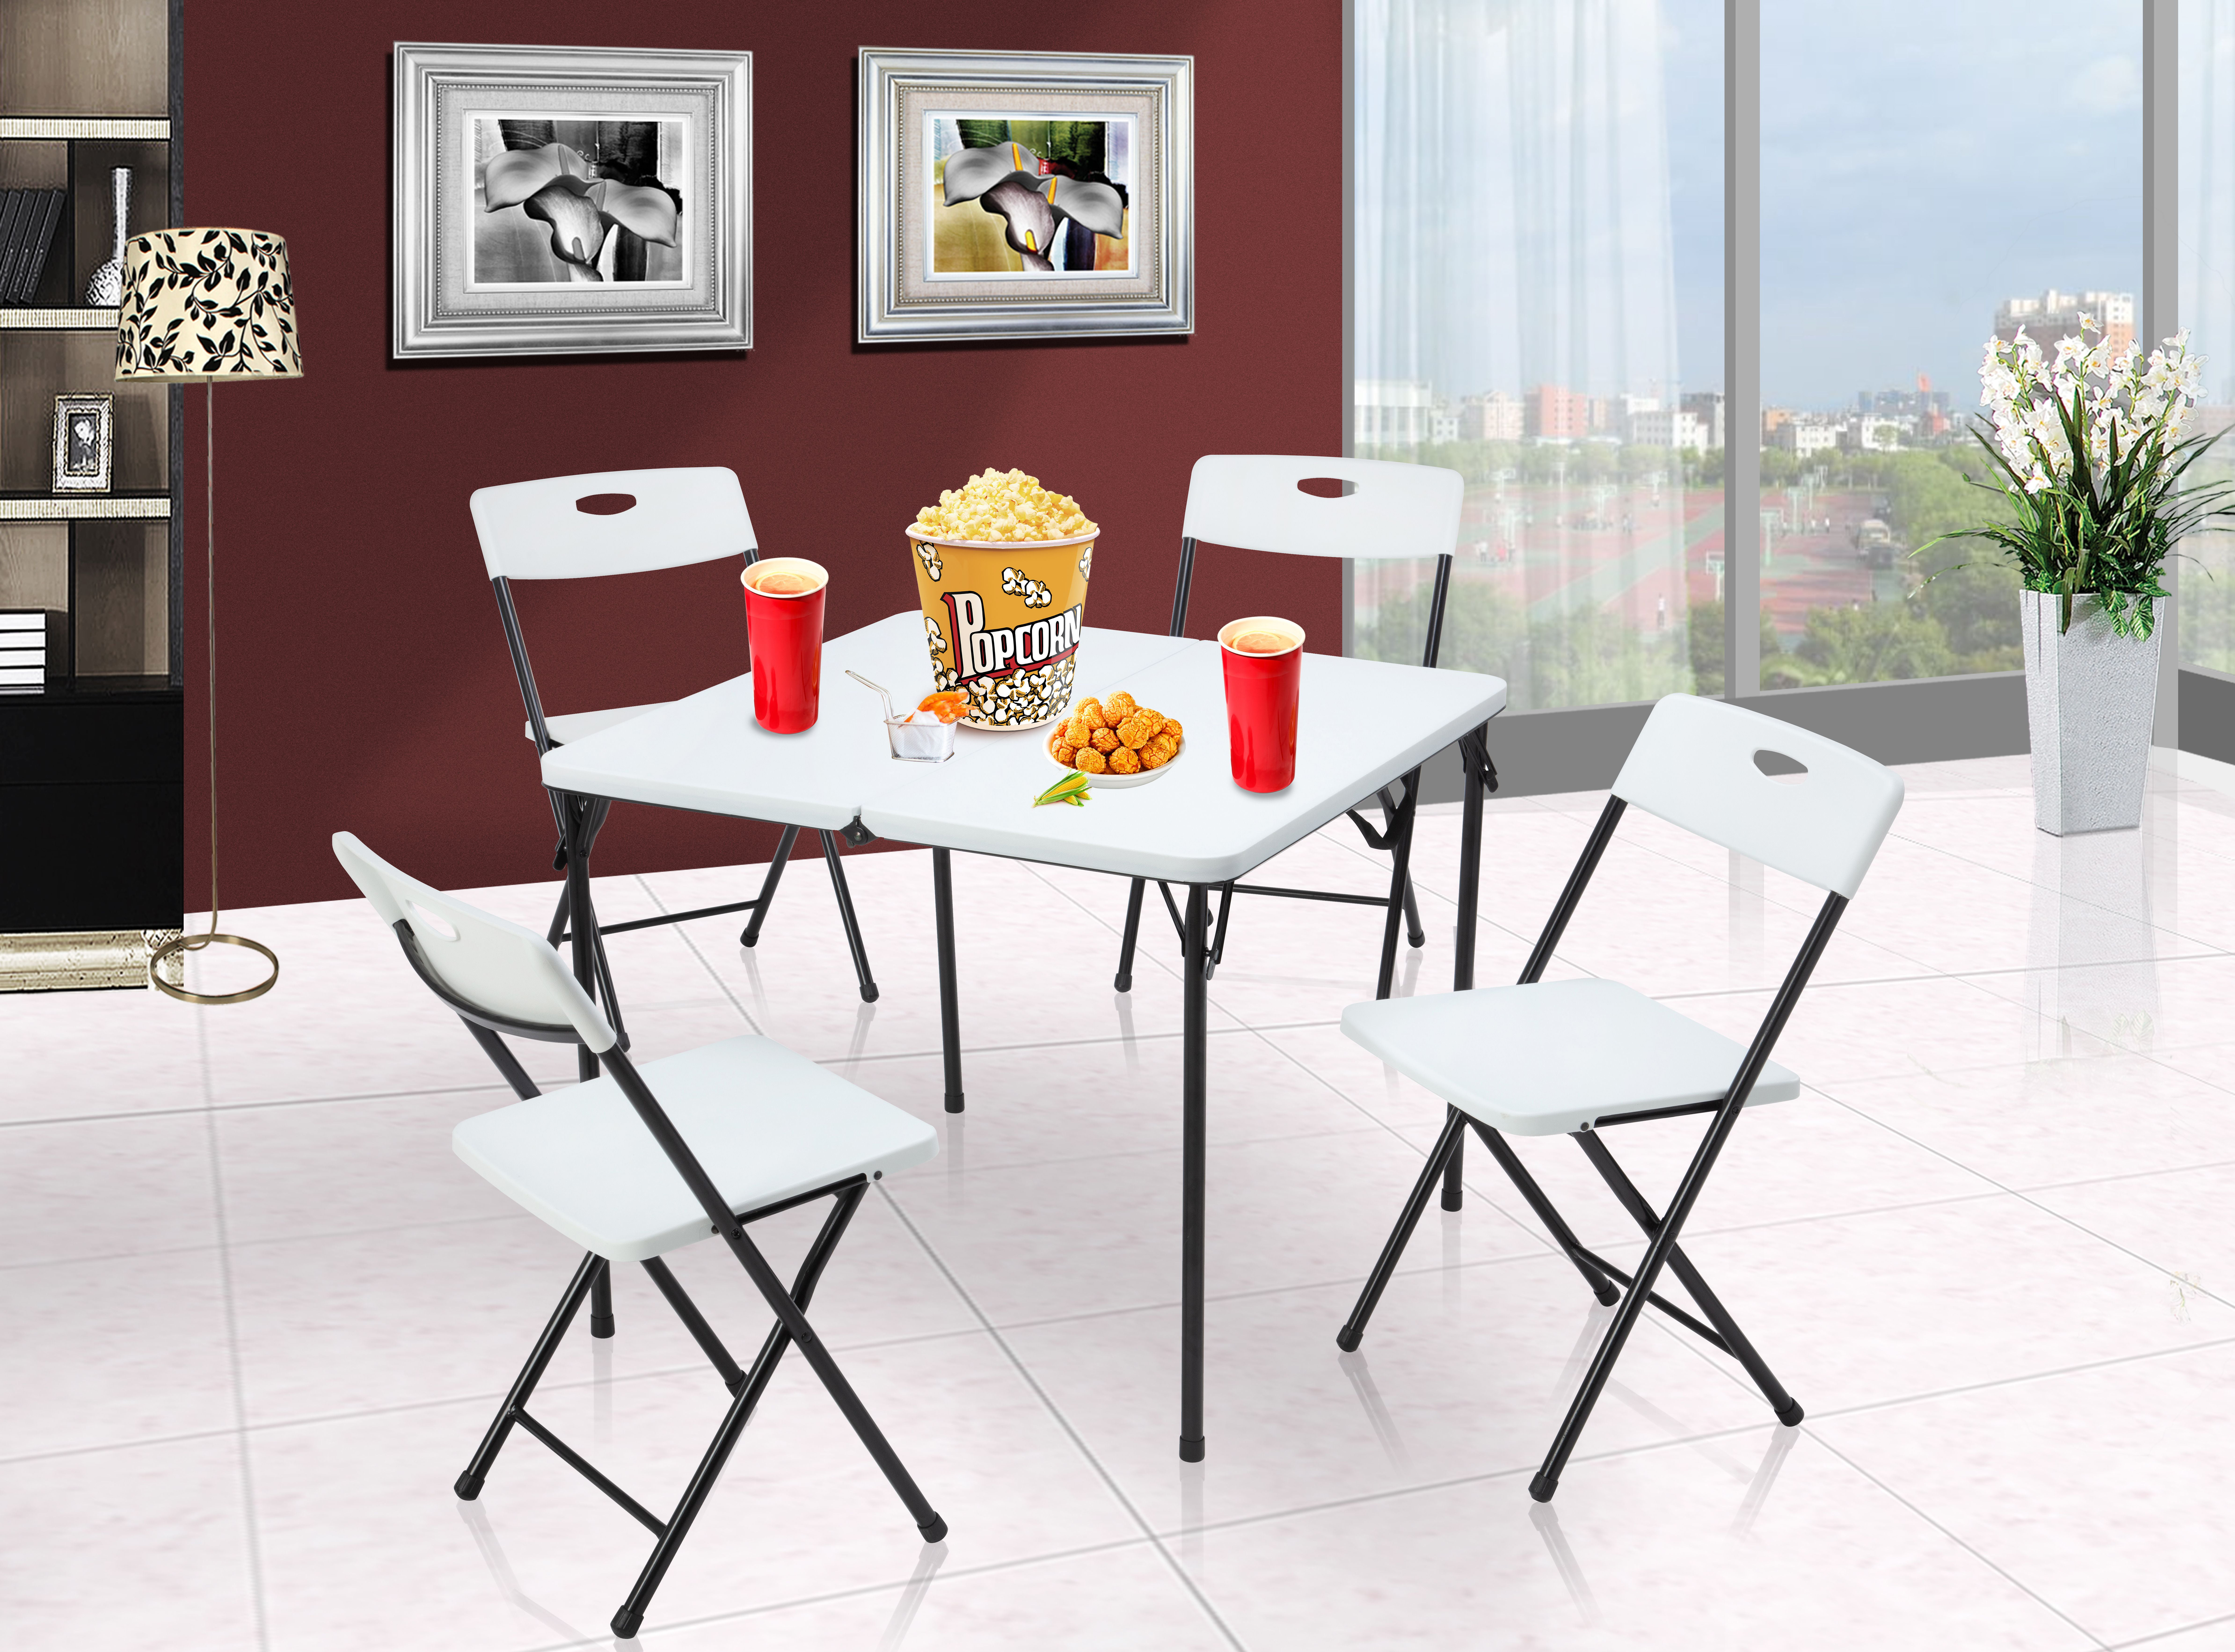 Mainstays 5 Piece Resin Plastic Card Table and Four Chairs Set, White